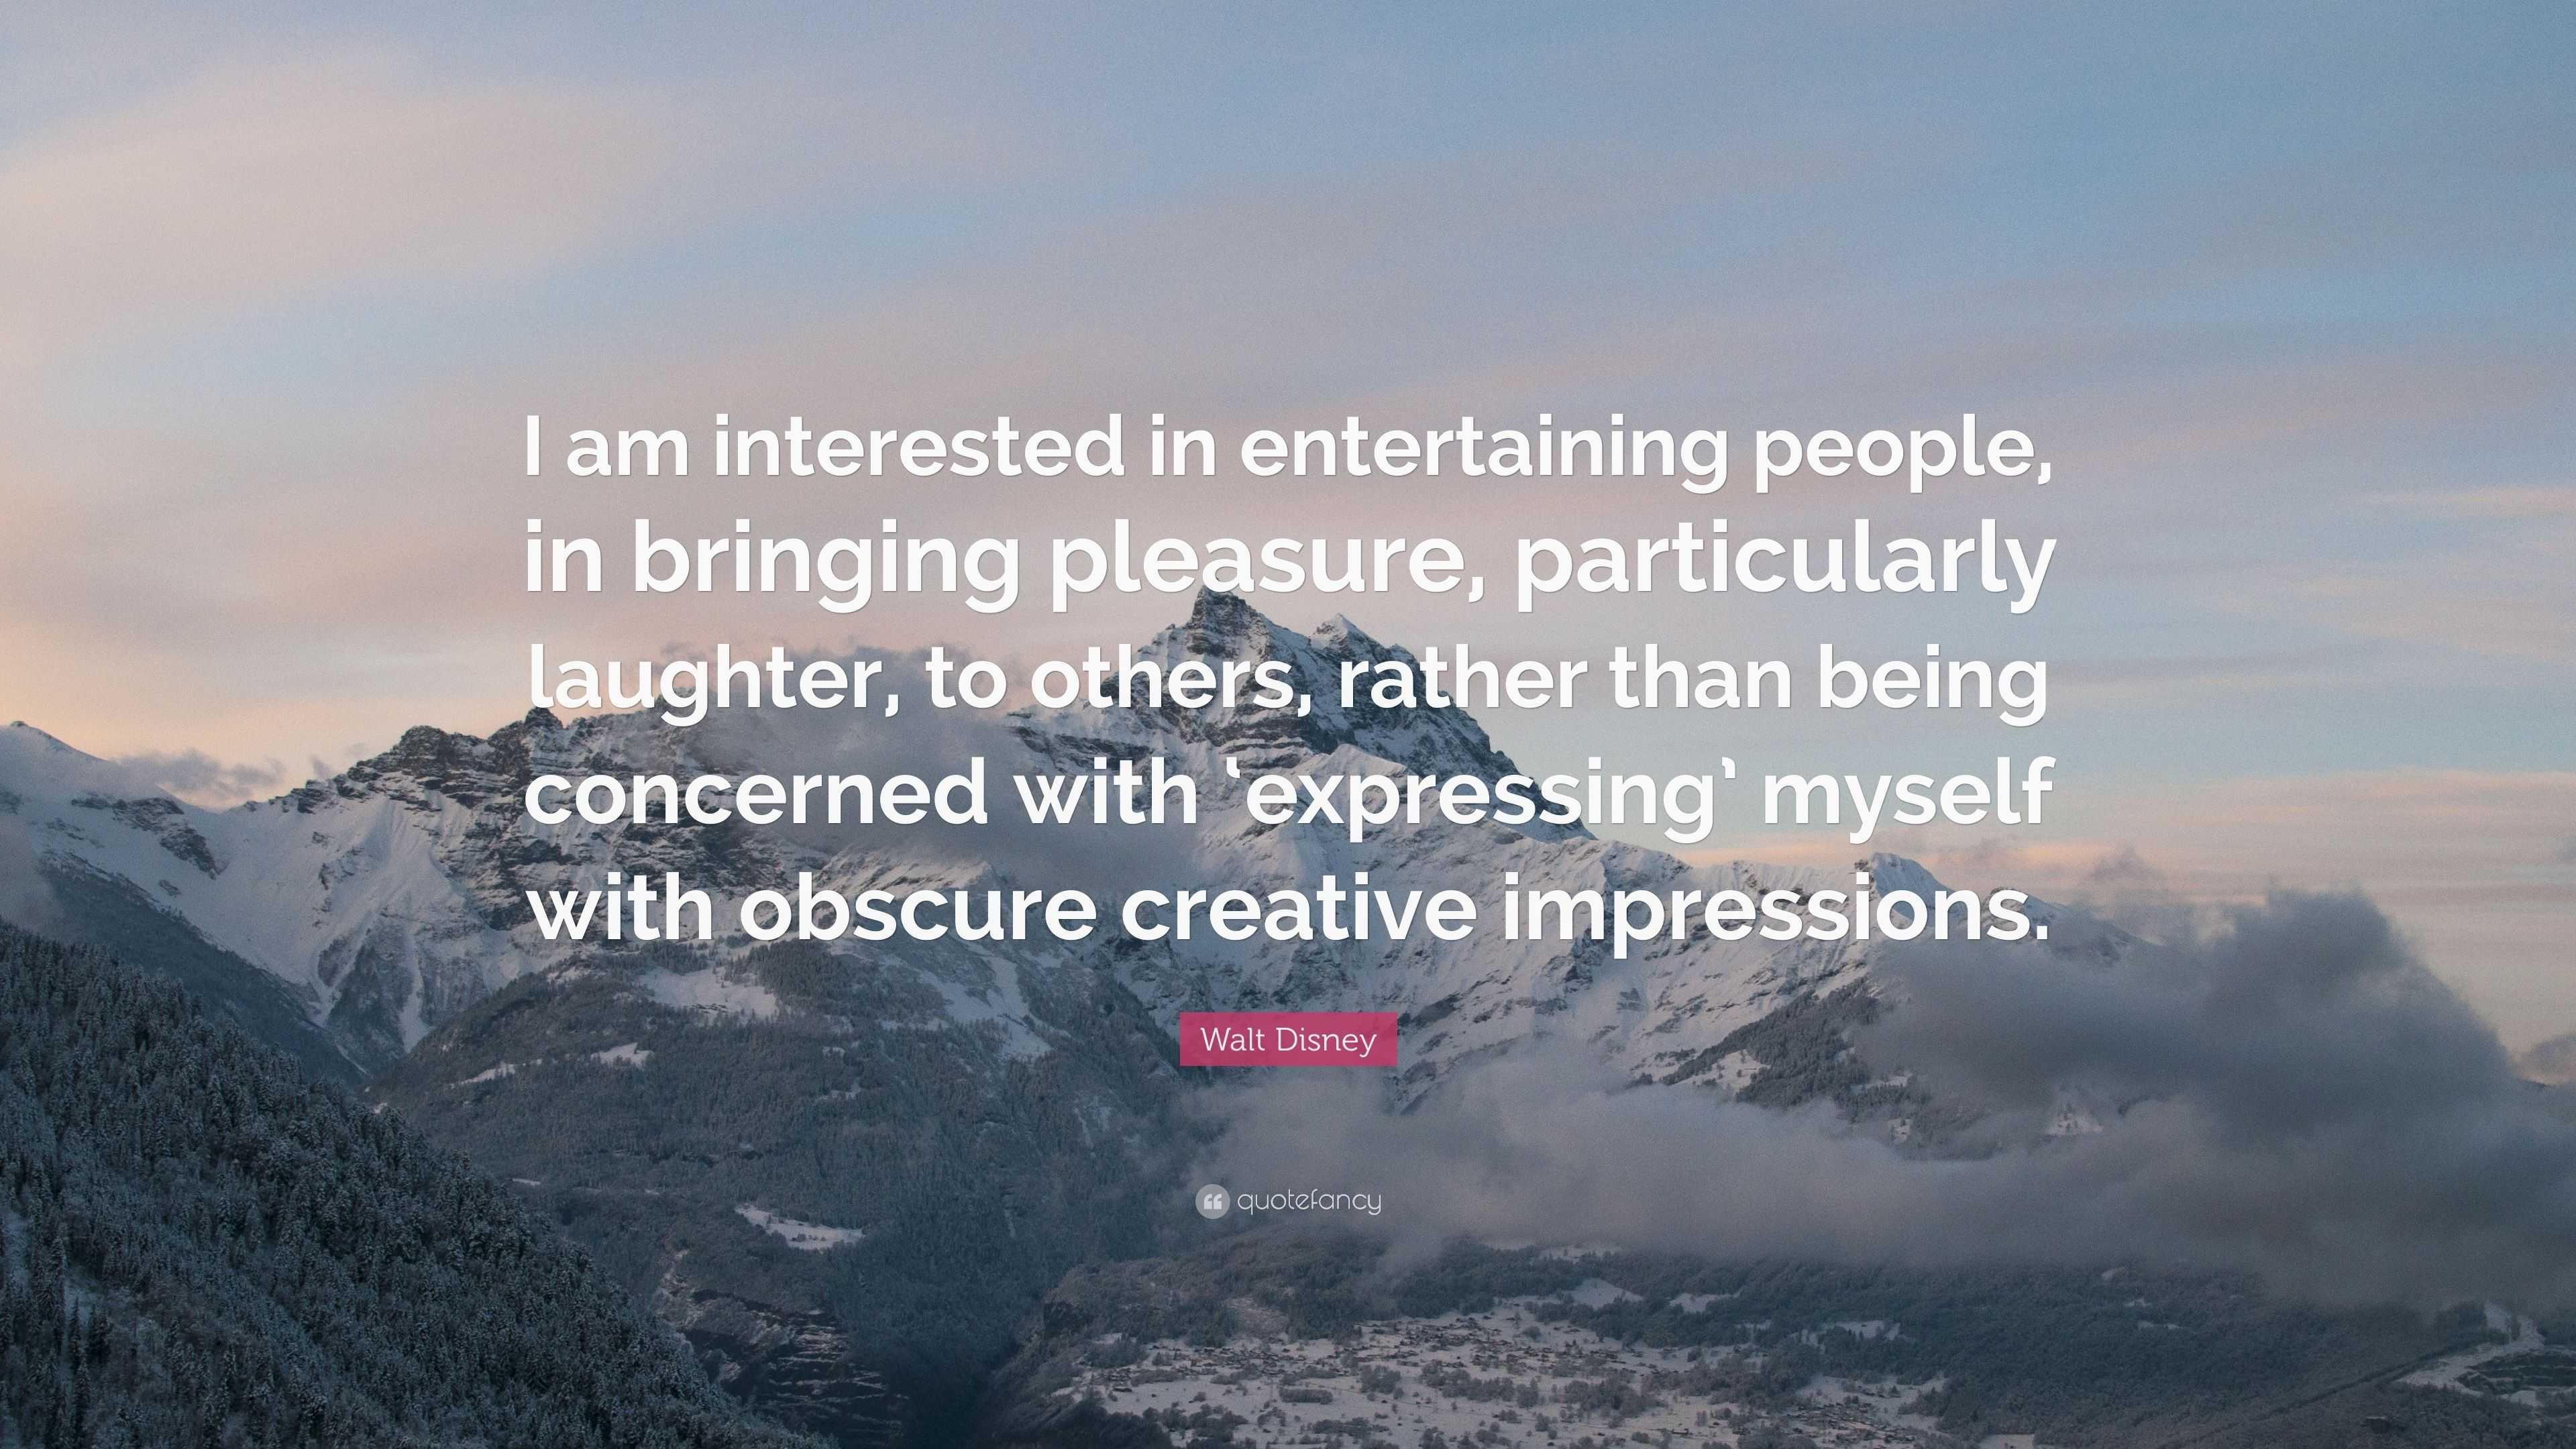 Walt Disney Quote: “I am interested in entertaining people, in bringing ...